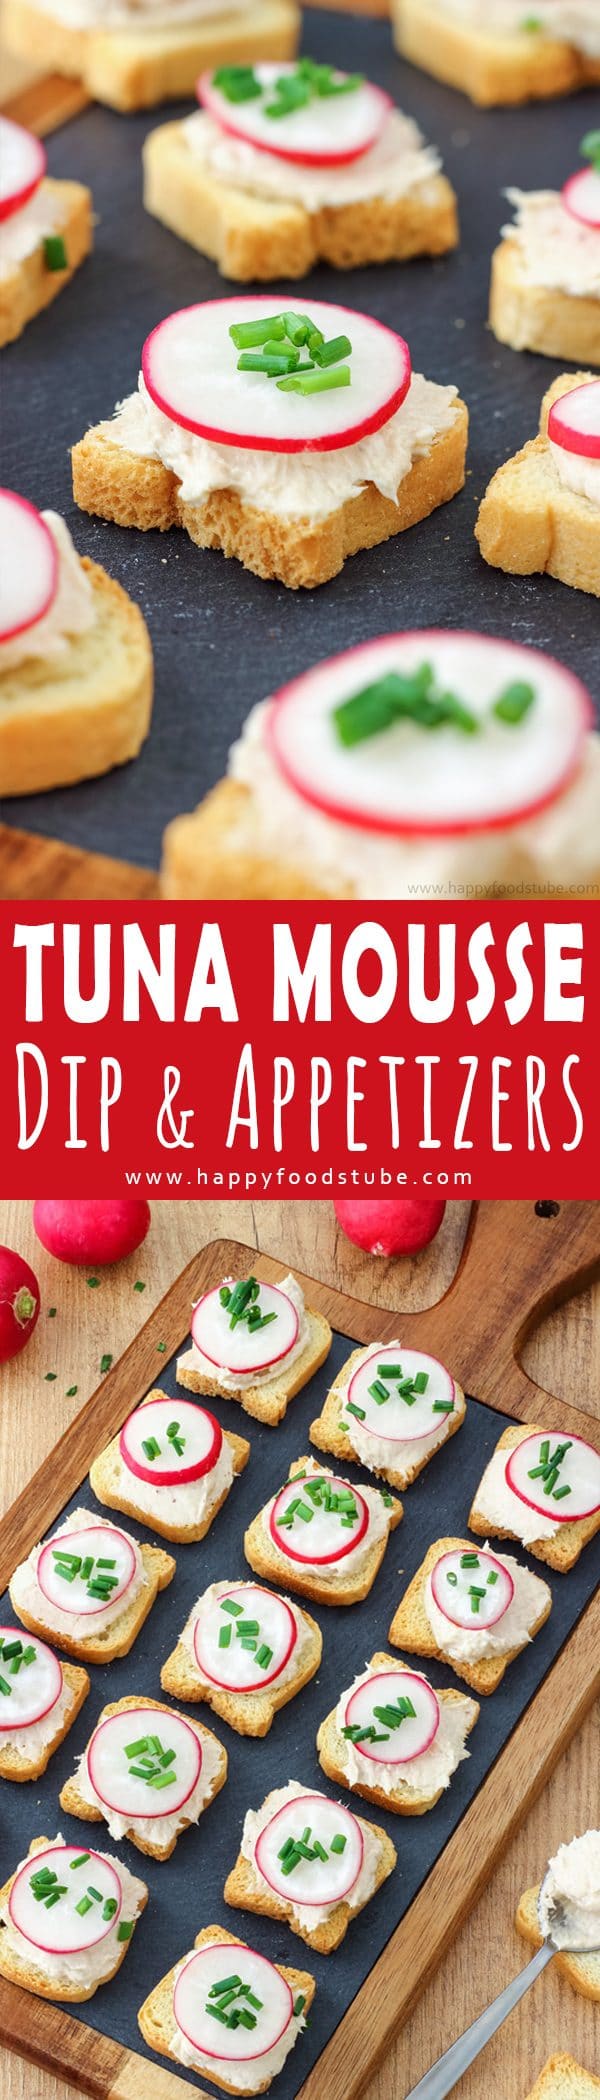 Tuna Mousse Dip and Appetizers Recipe Picture